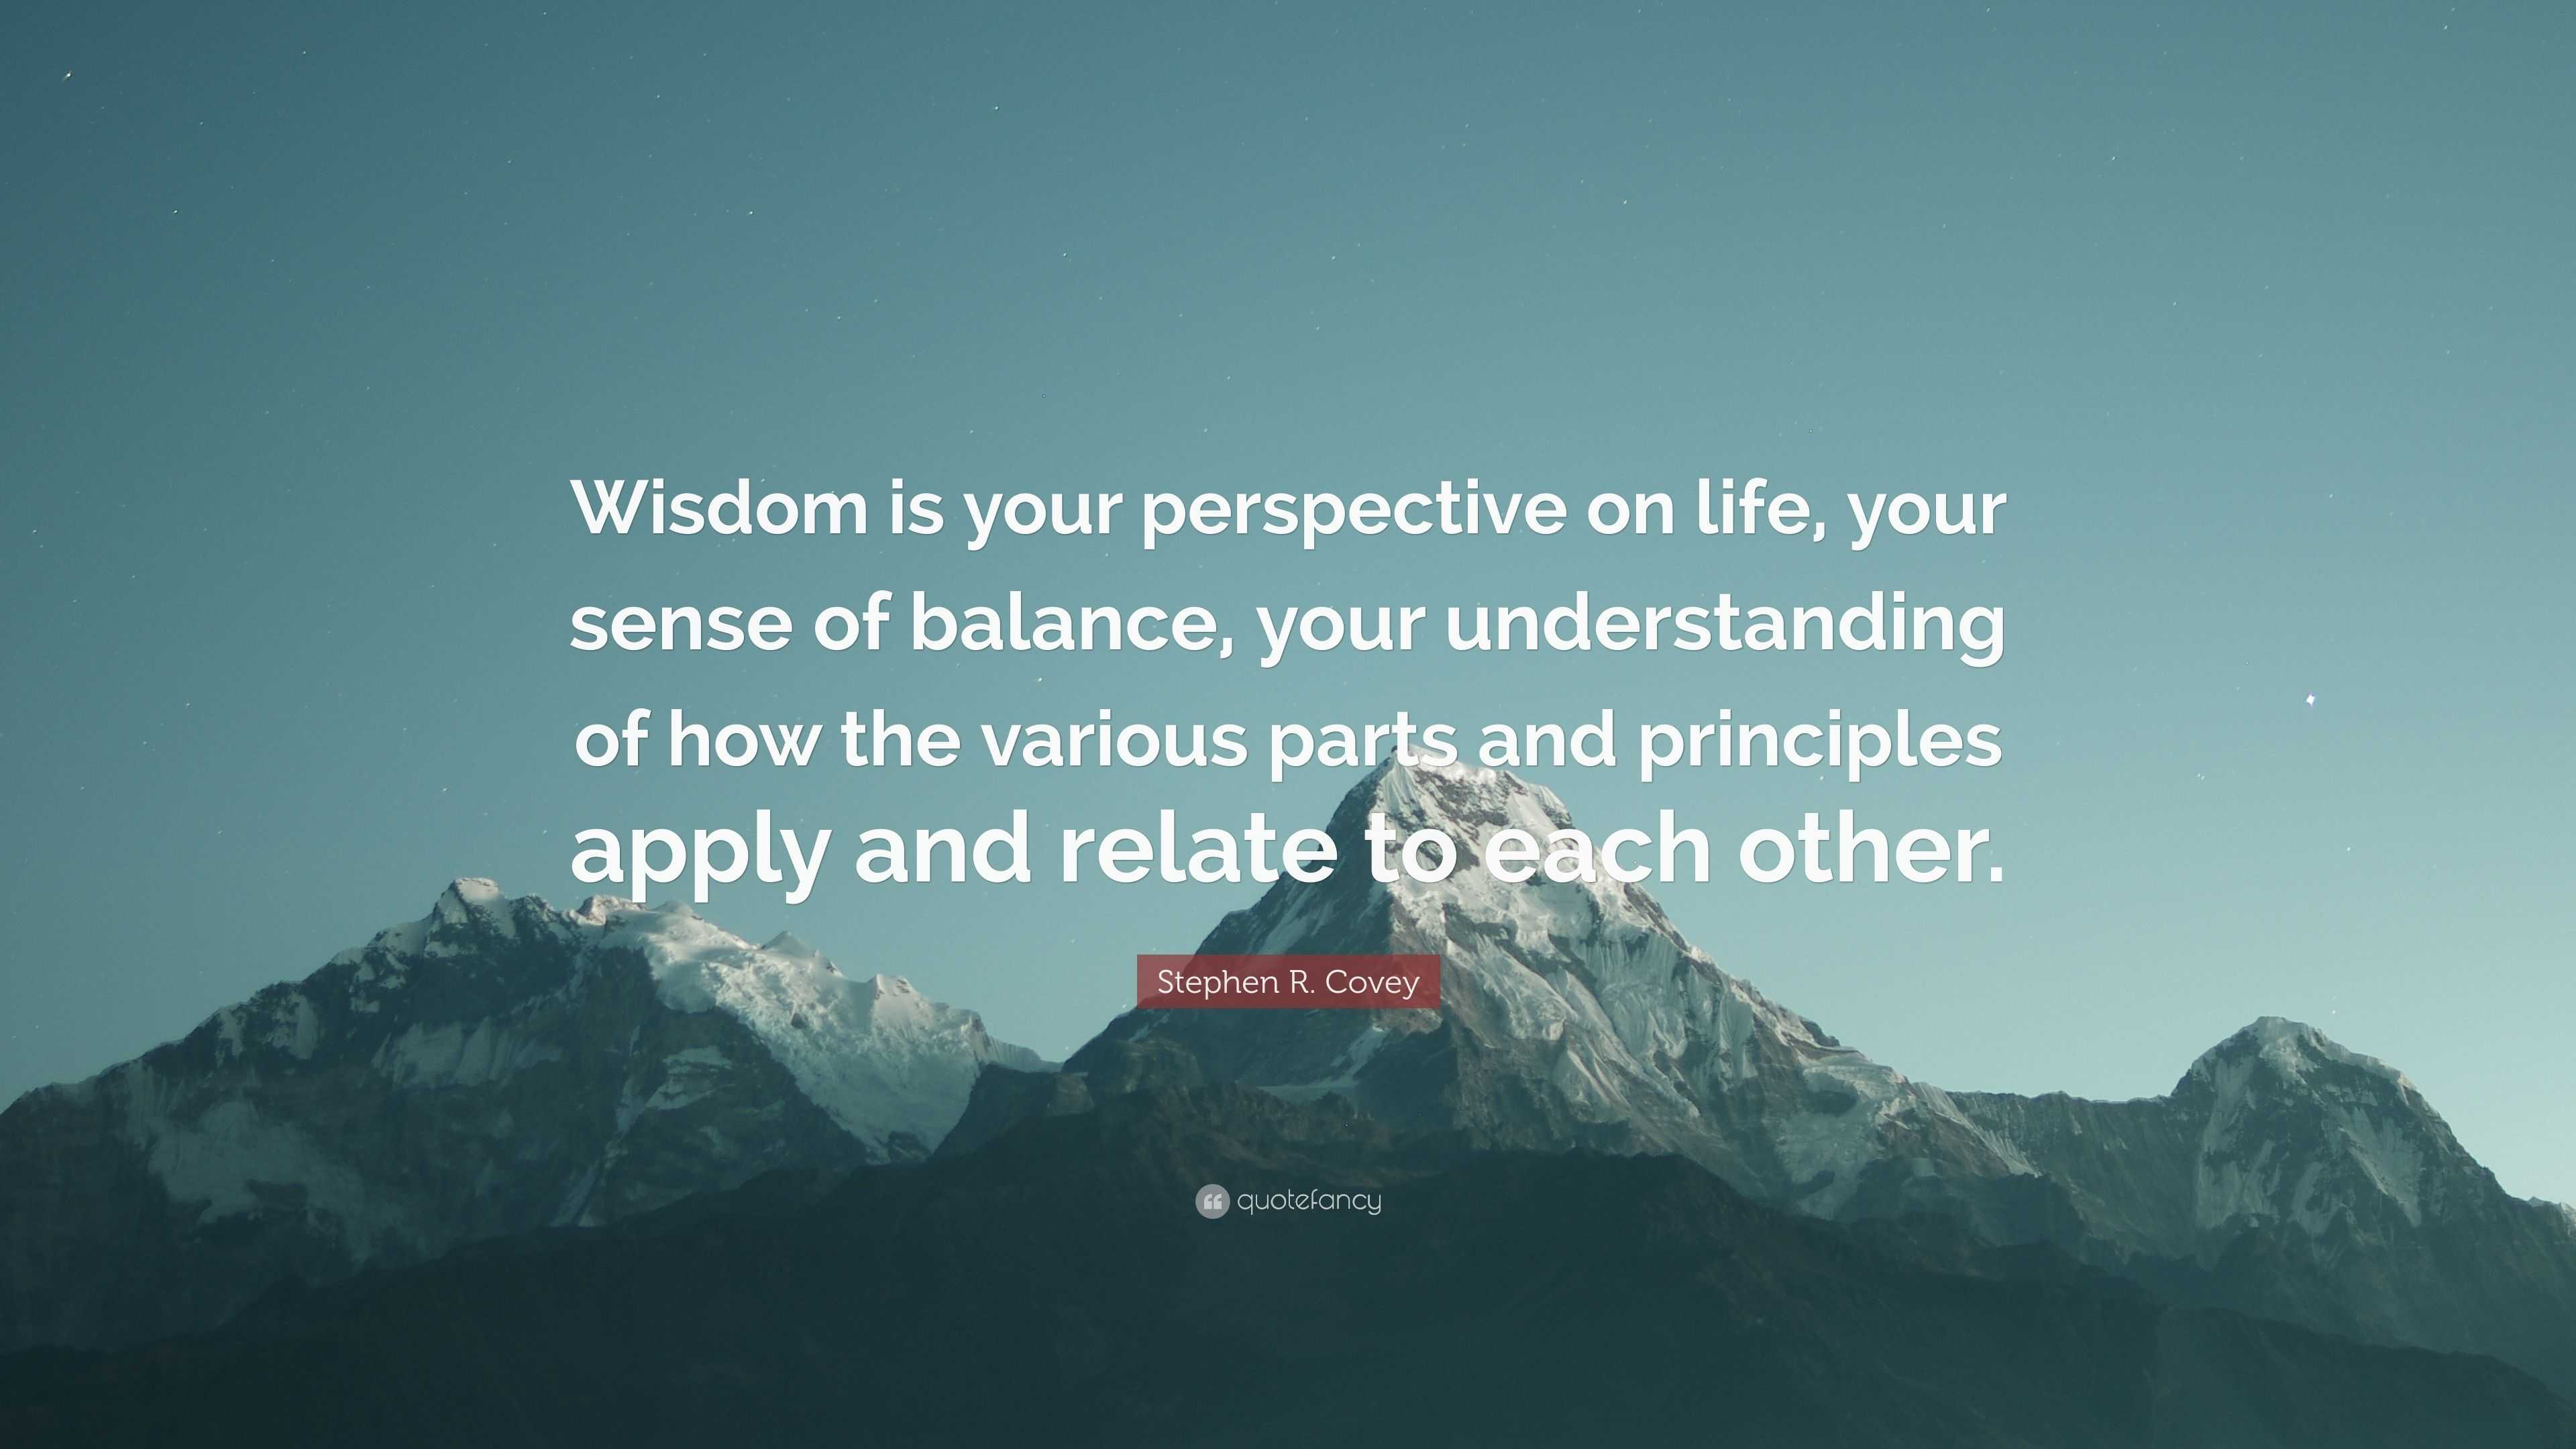 Stephen R. Covey Quote: “Wisdom is your perspective on life, your sense ...